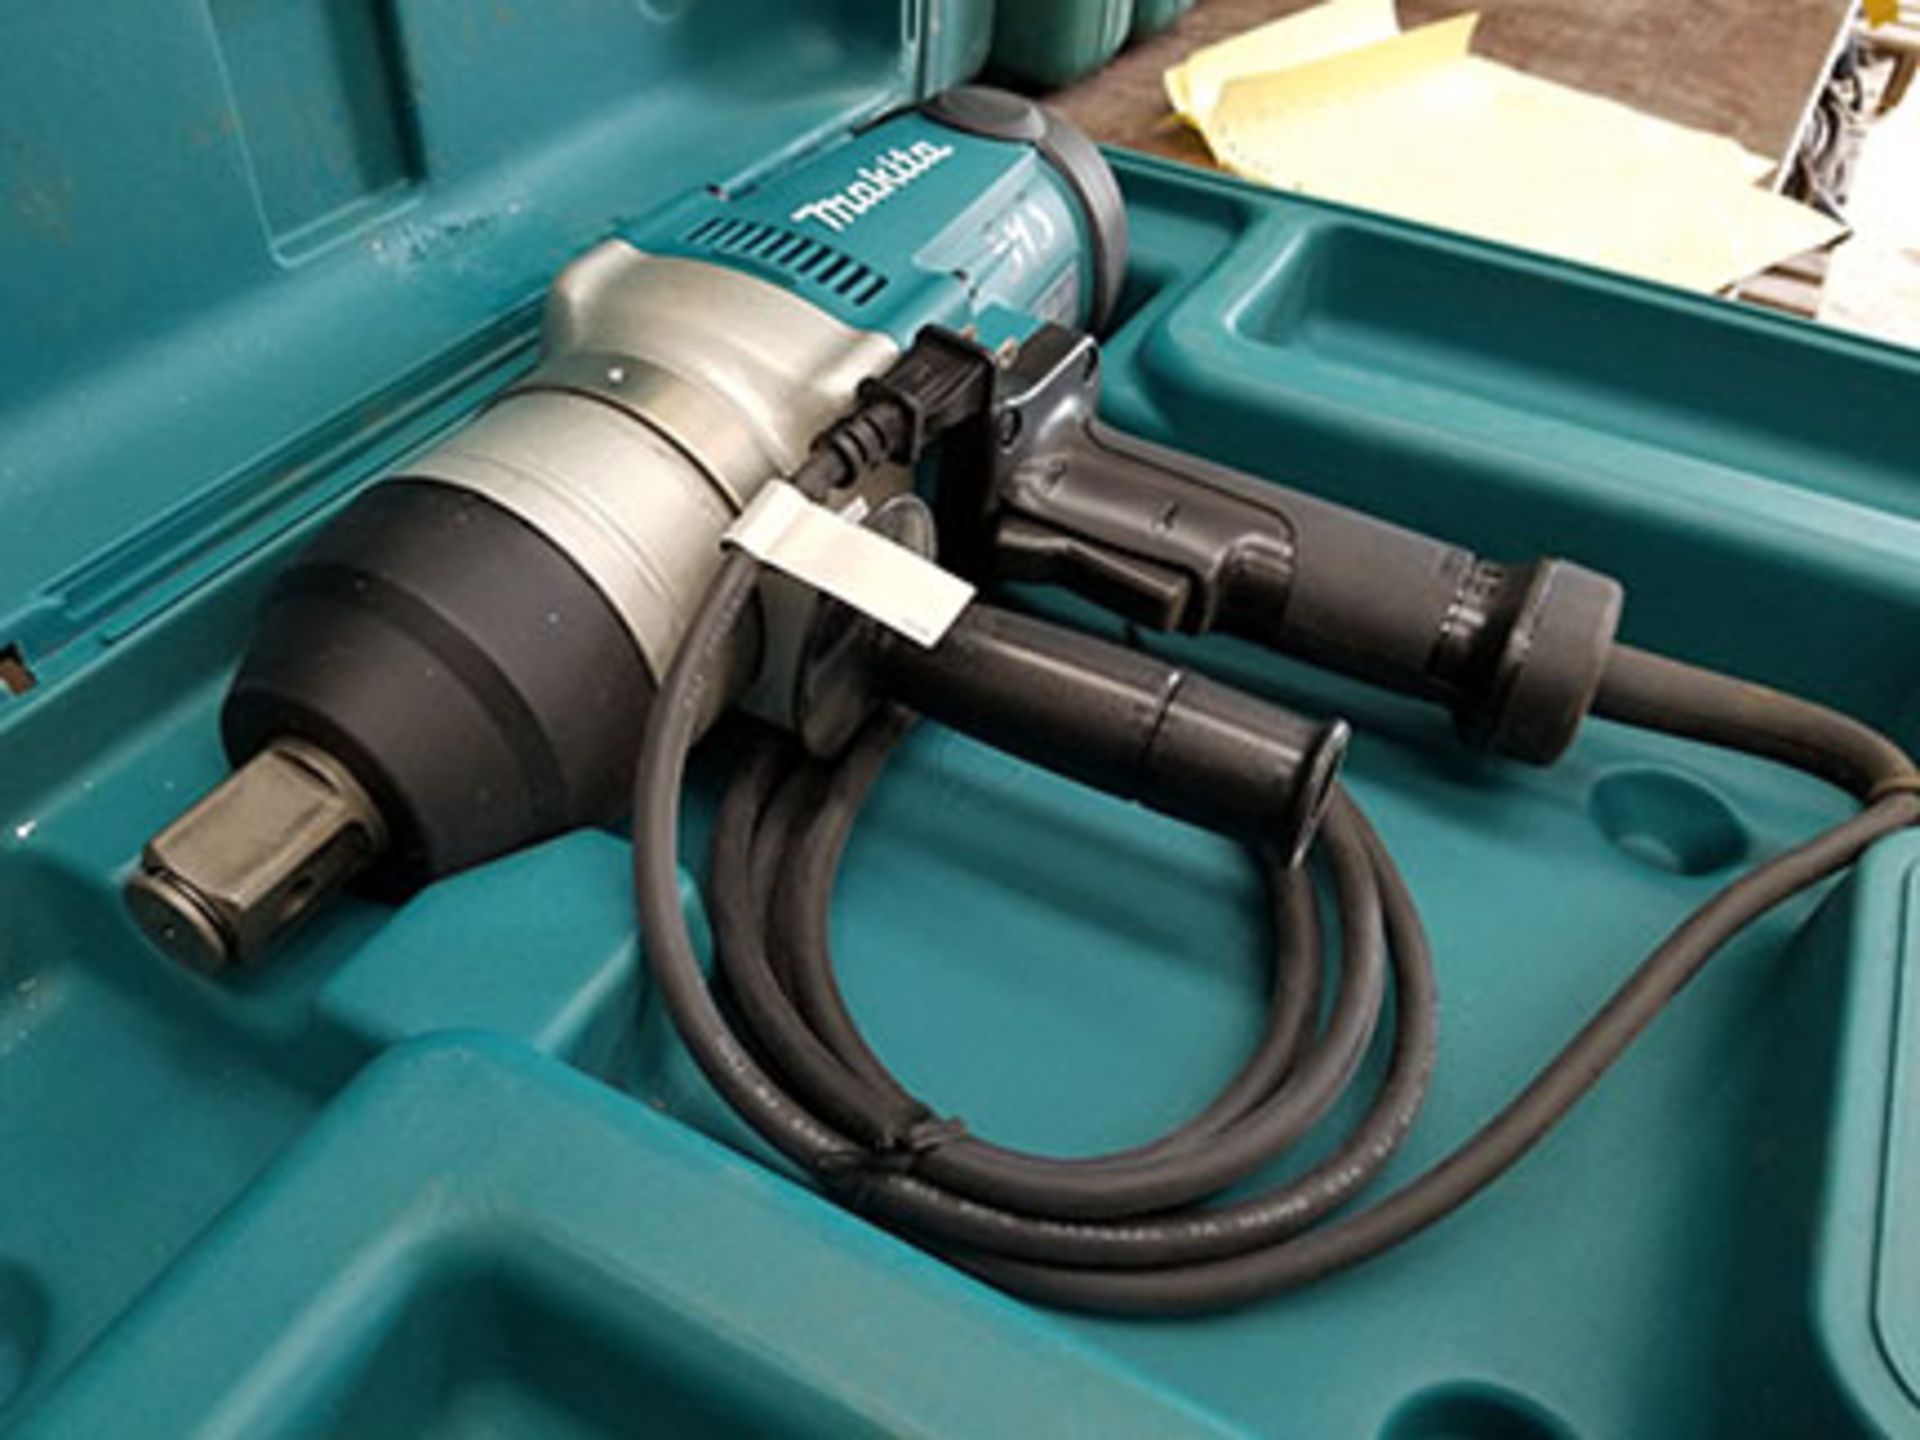 MAKITA TW1000 120V ELECTRIC IMPACT WRENCH, 1” DRIVE - Image 4 of 5